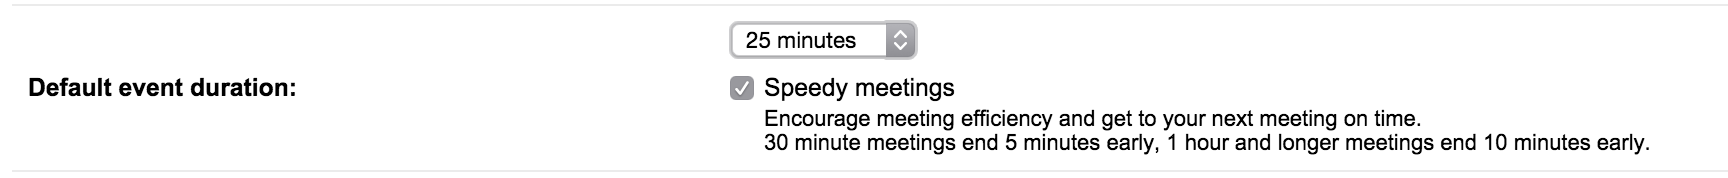 If you use Google calendar go to Settings - &gt; General and change the default time to 25 min and tick off the box “Speedy Meetings”